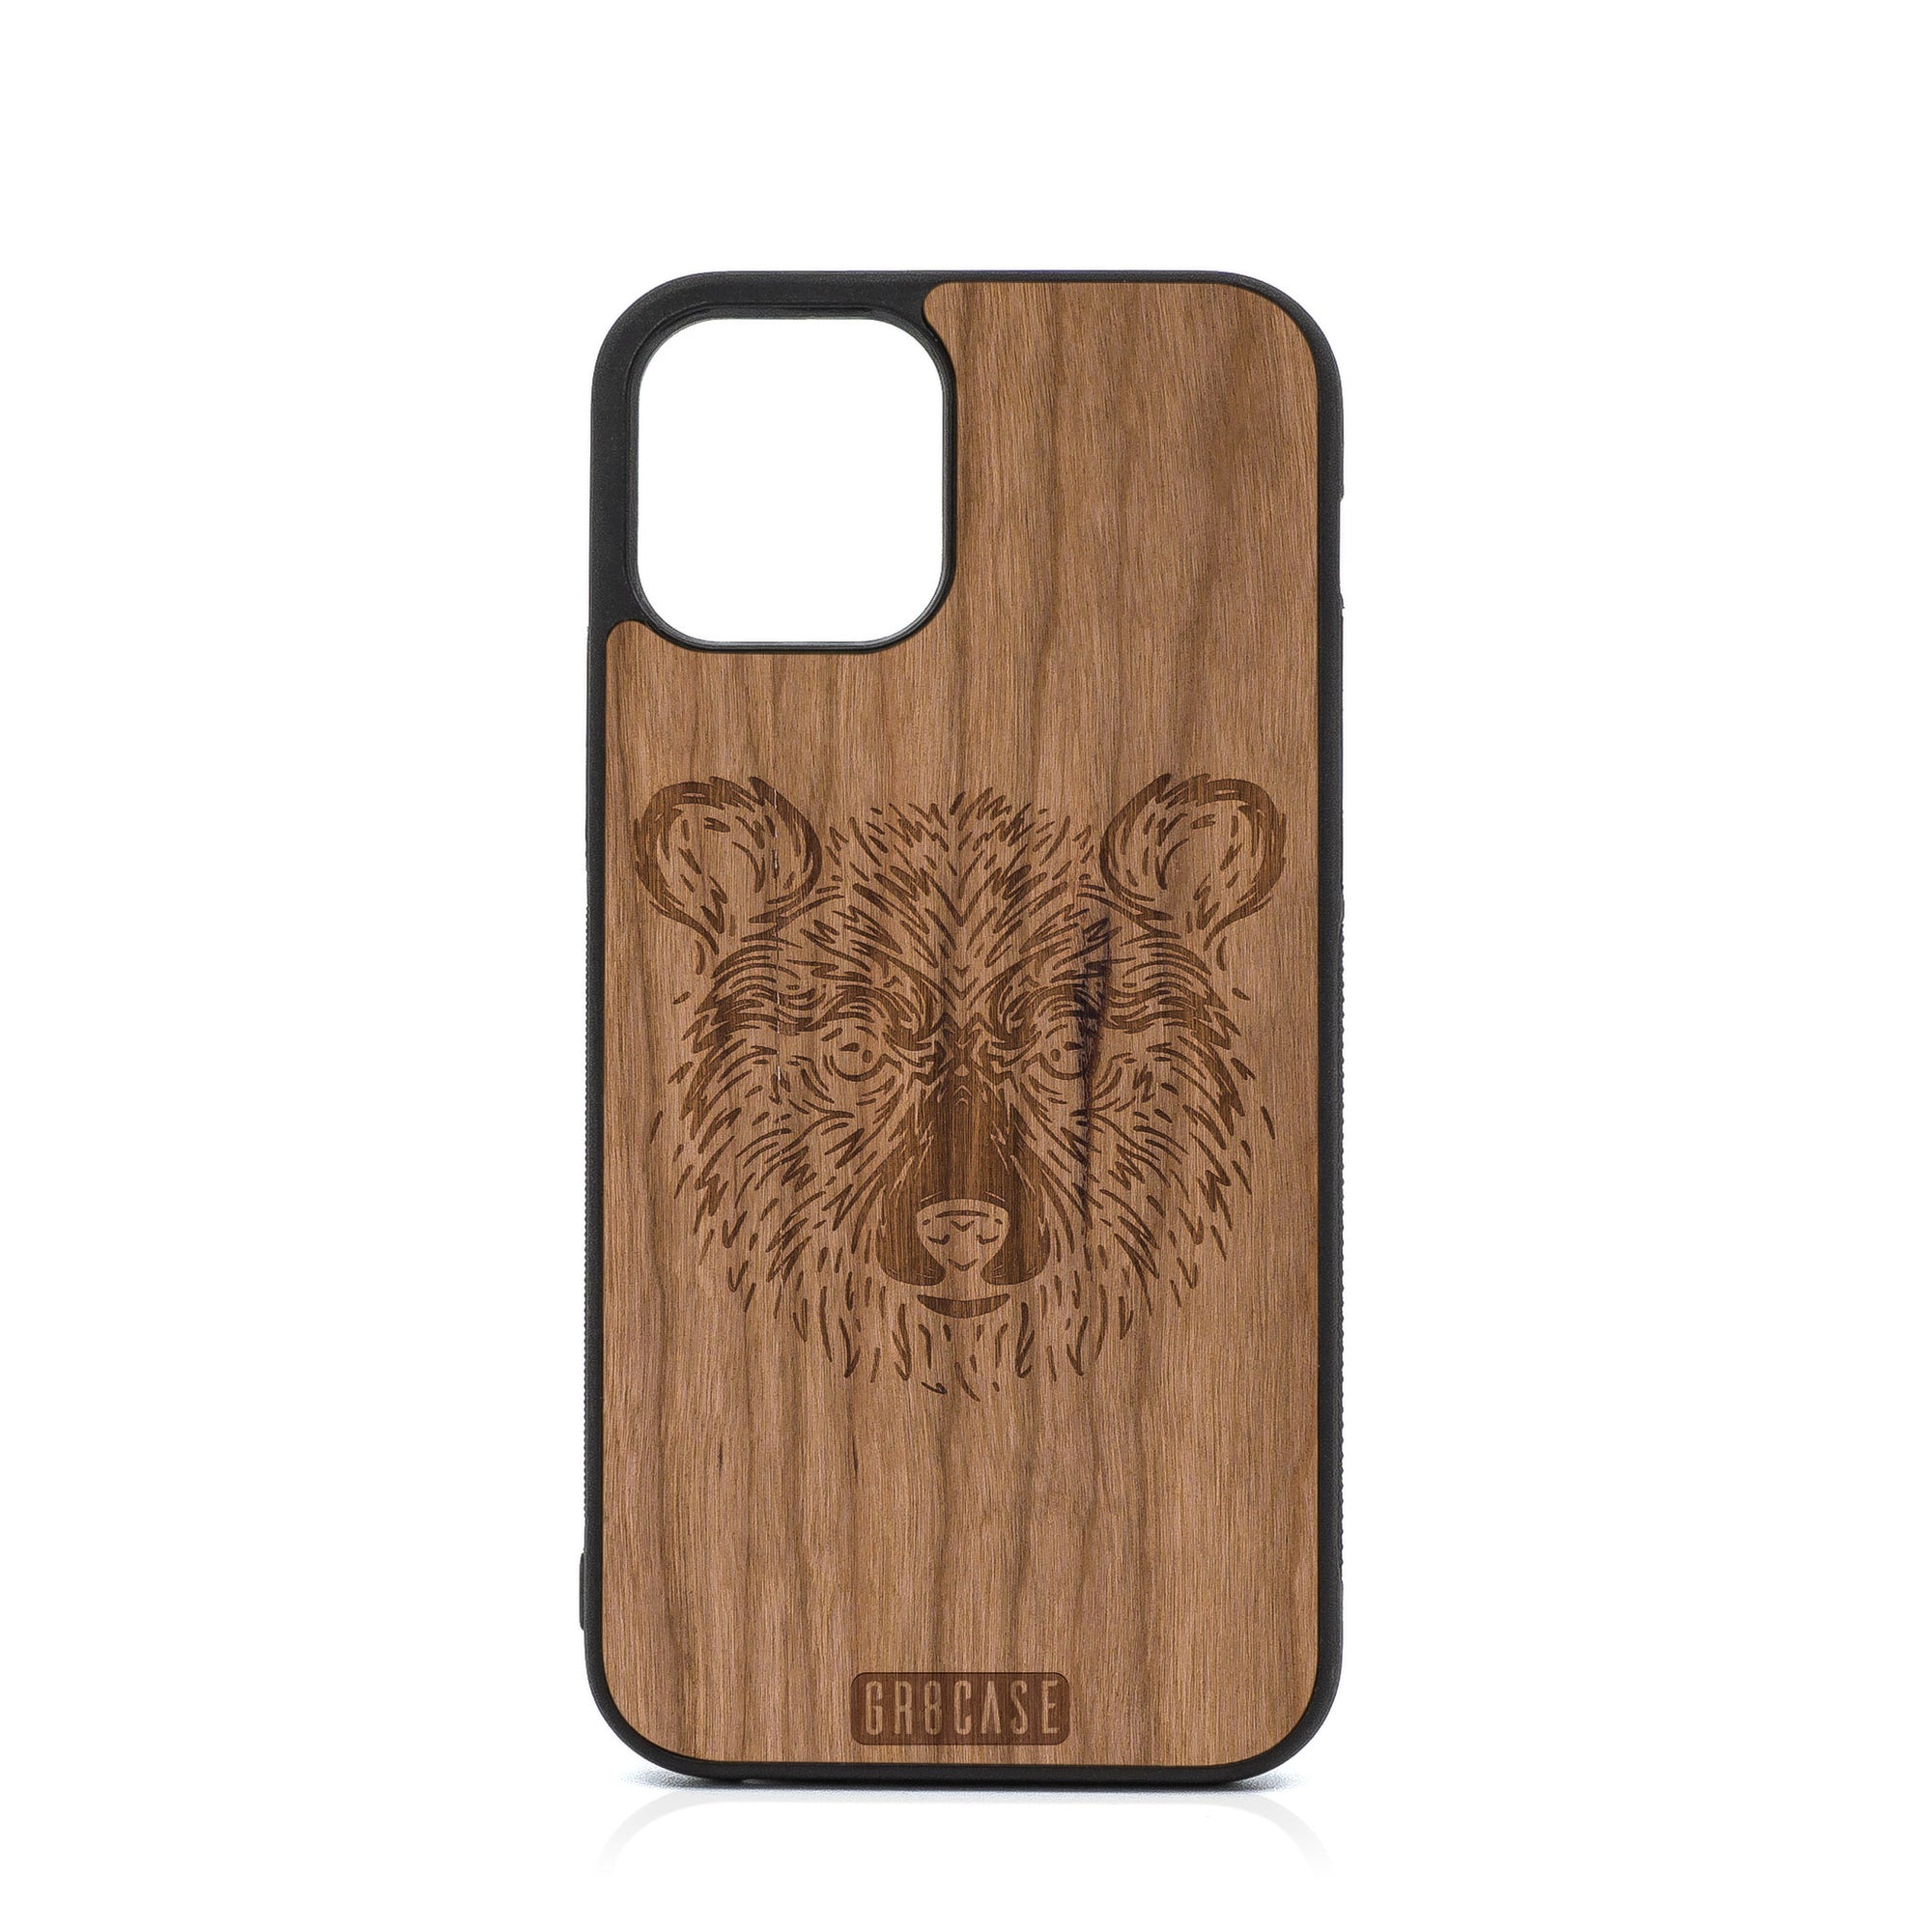 Furry Bear Design Wood Case For iPhone 12